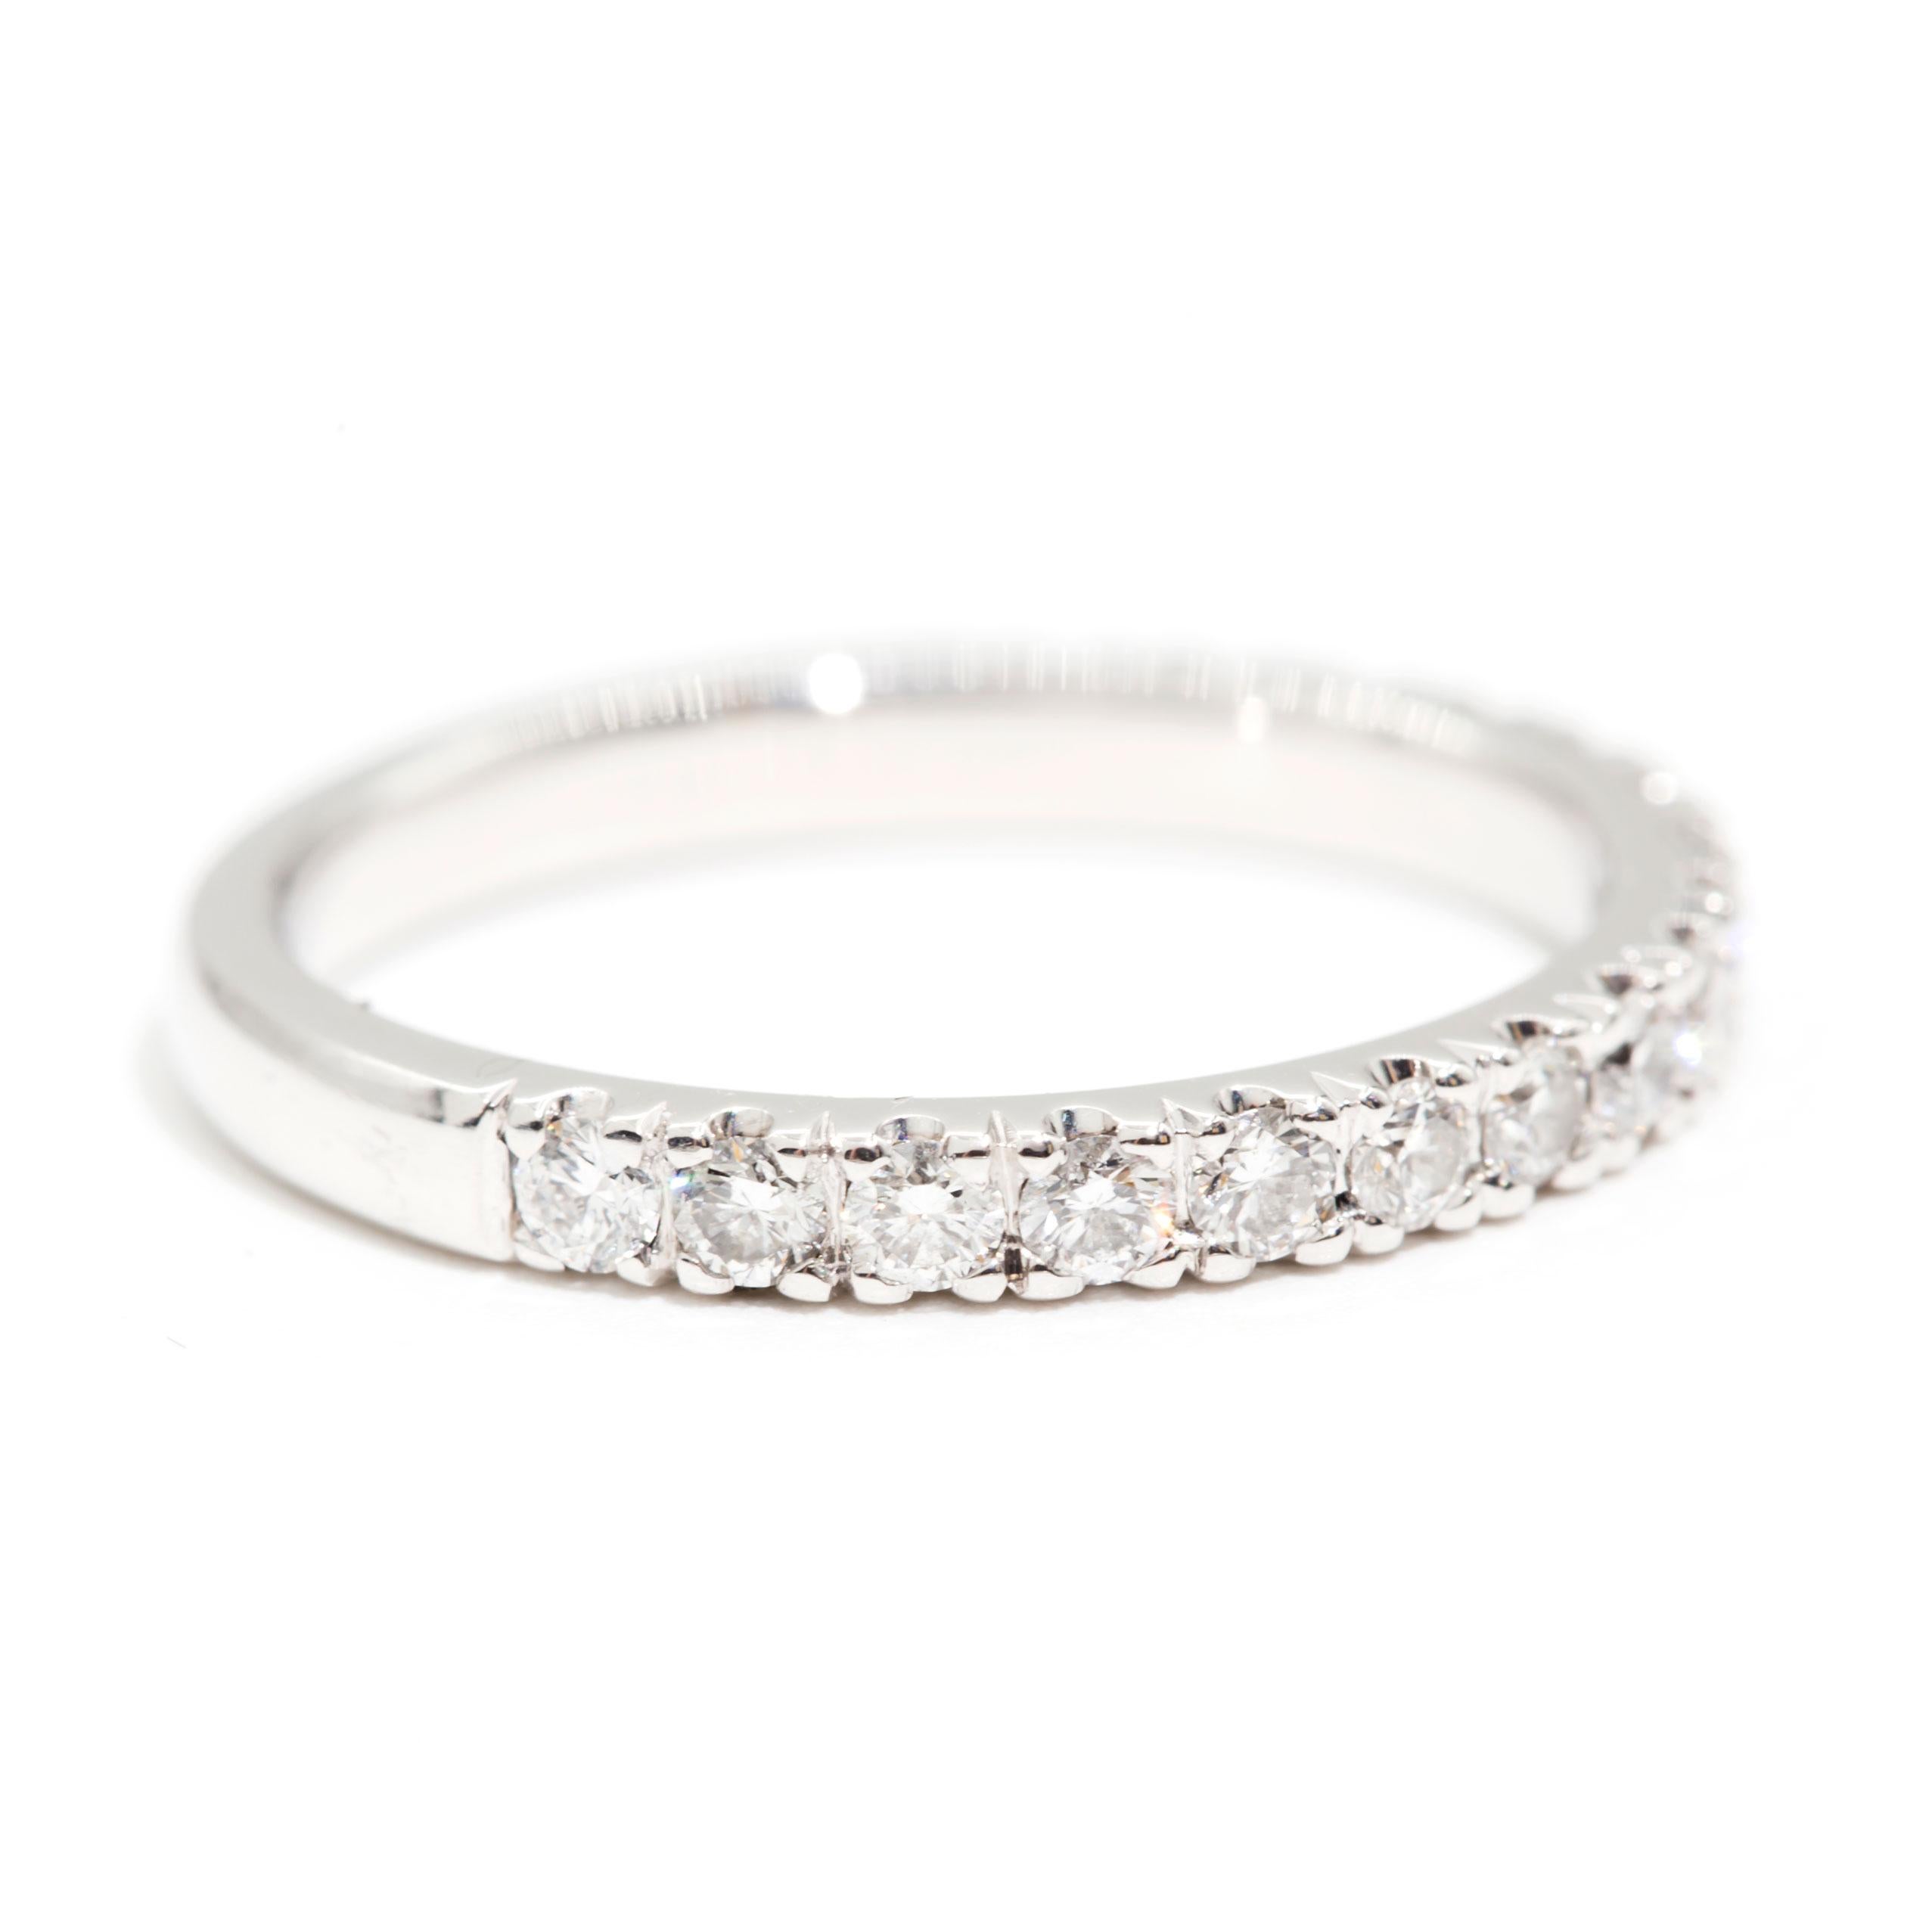 Carefully crafted in 18 carat white gold this timeless eternity bridal ring features seventeen glittering round brilliant cut claw set diamonds.  We have named this sweet ring The Jean Ring. The Jean Ring sits low to the finger so she is ever so